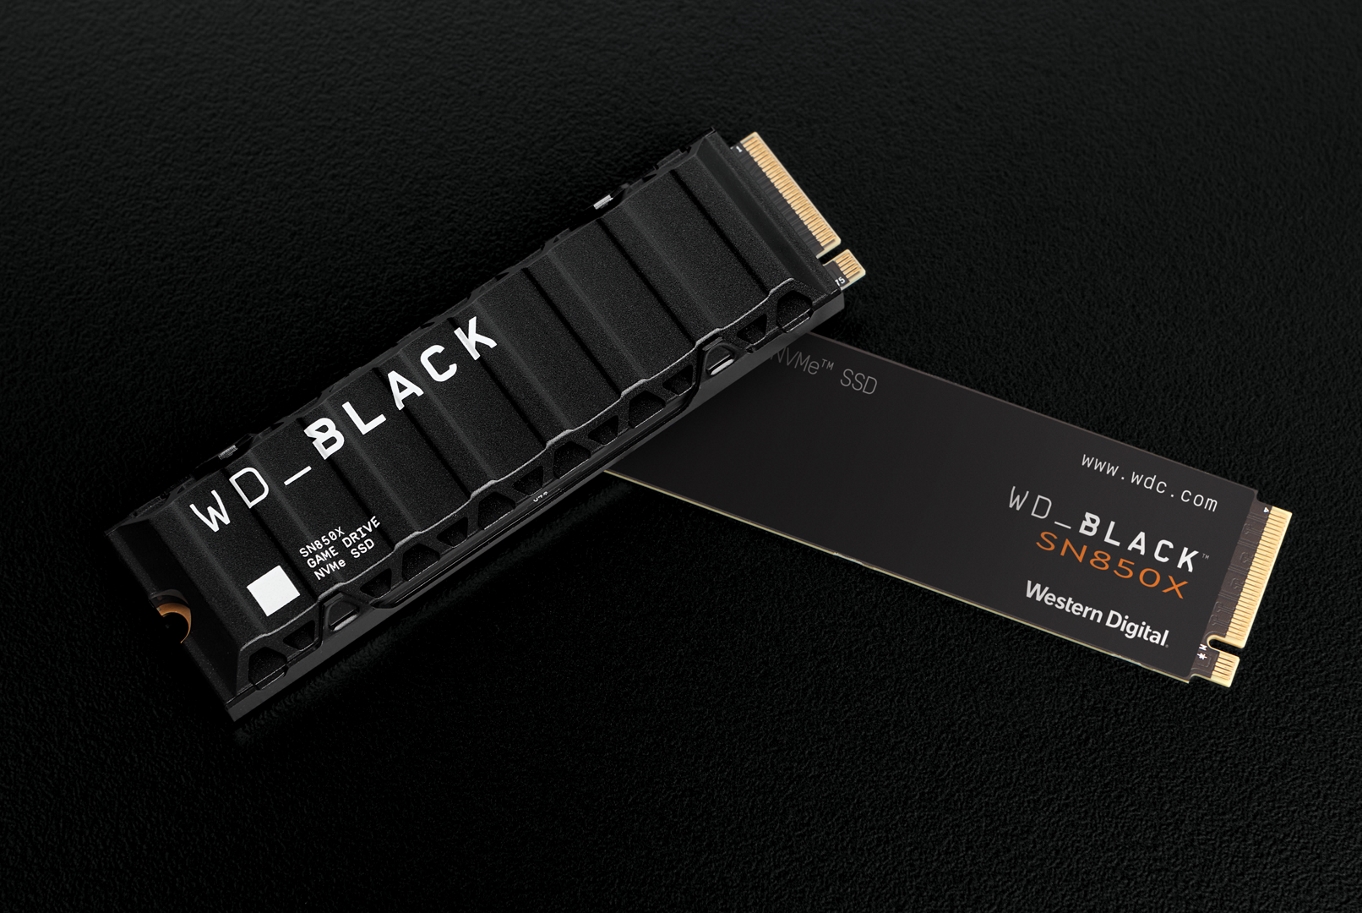 Western Digital Announces WD_BLACK SN850X NVMe and P40 Game Drive SSDs